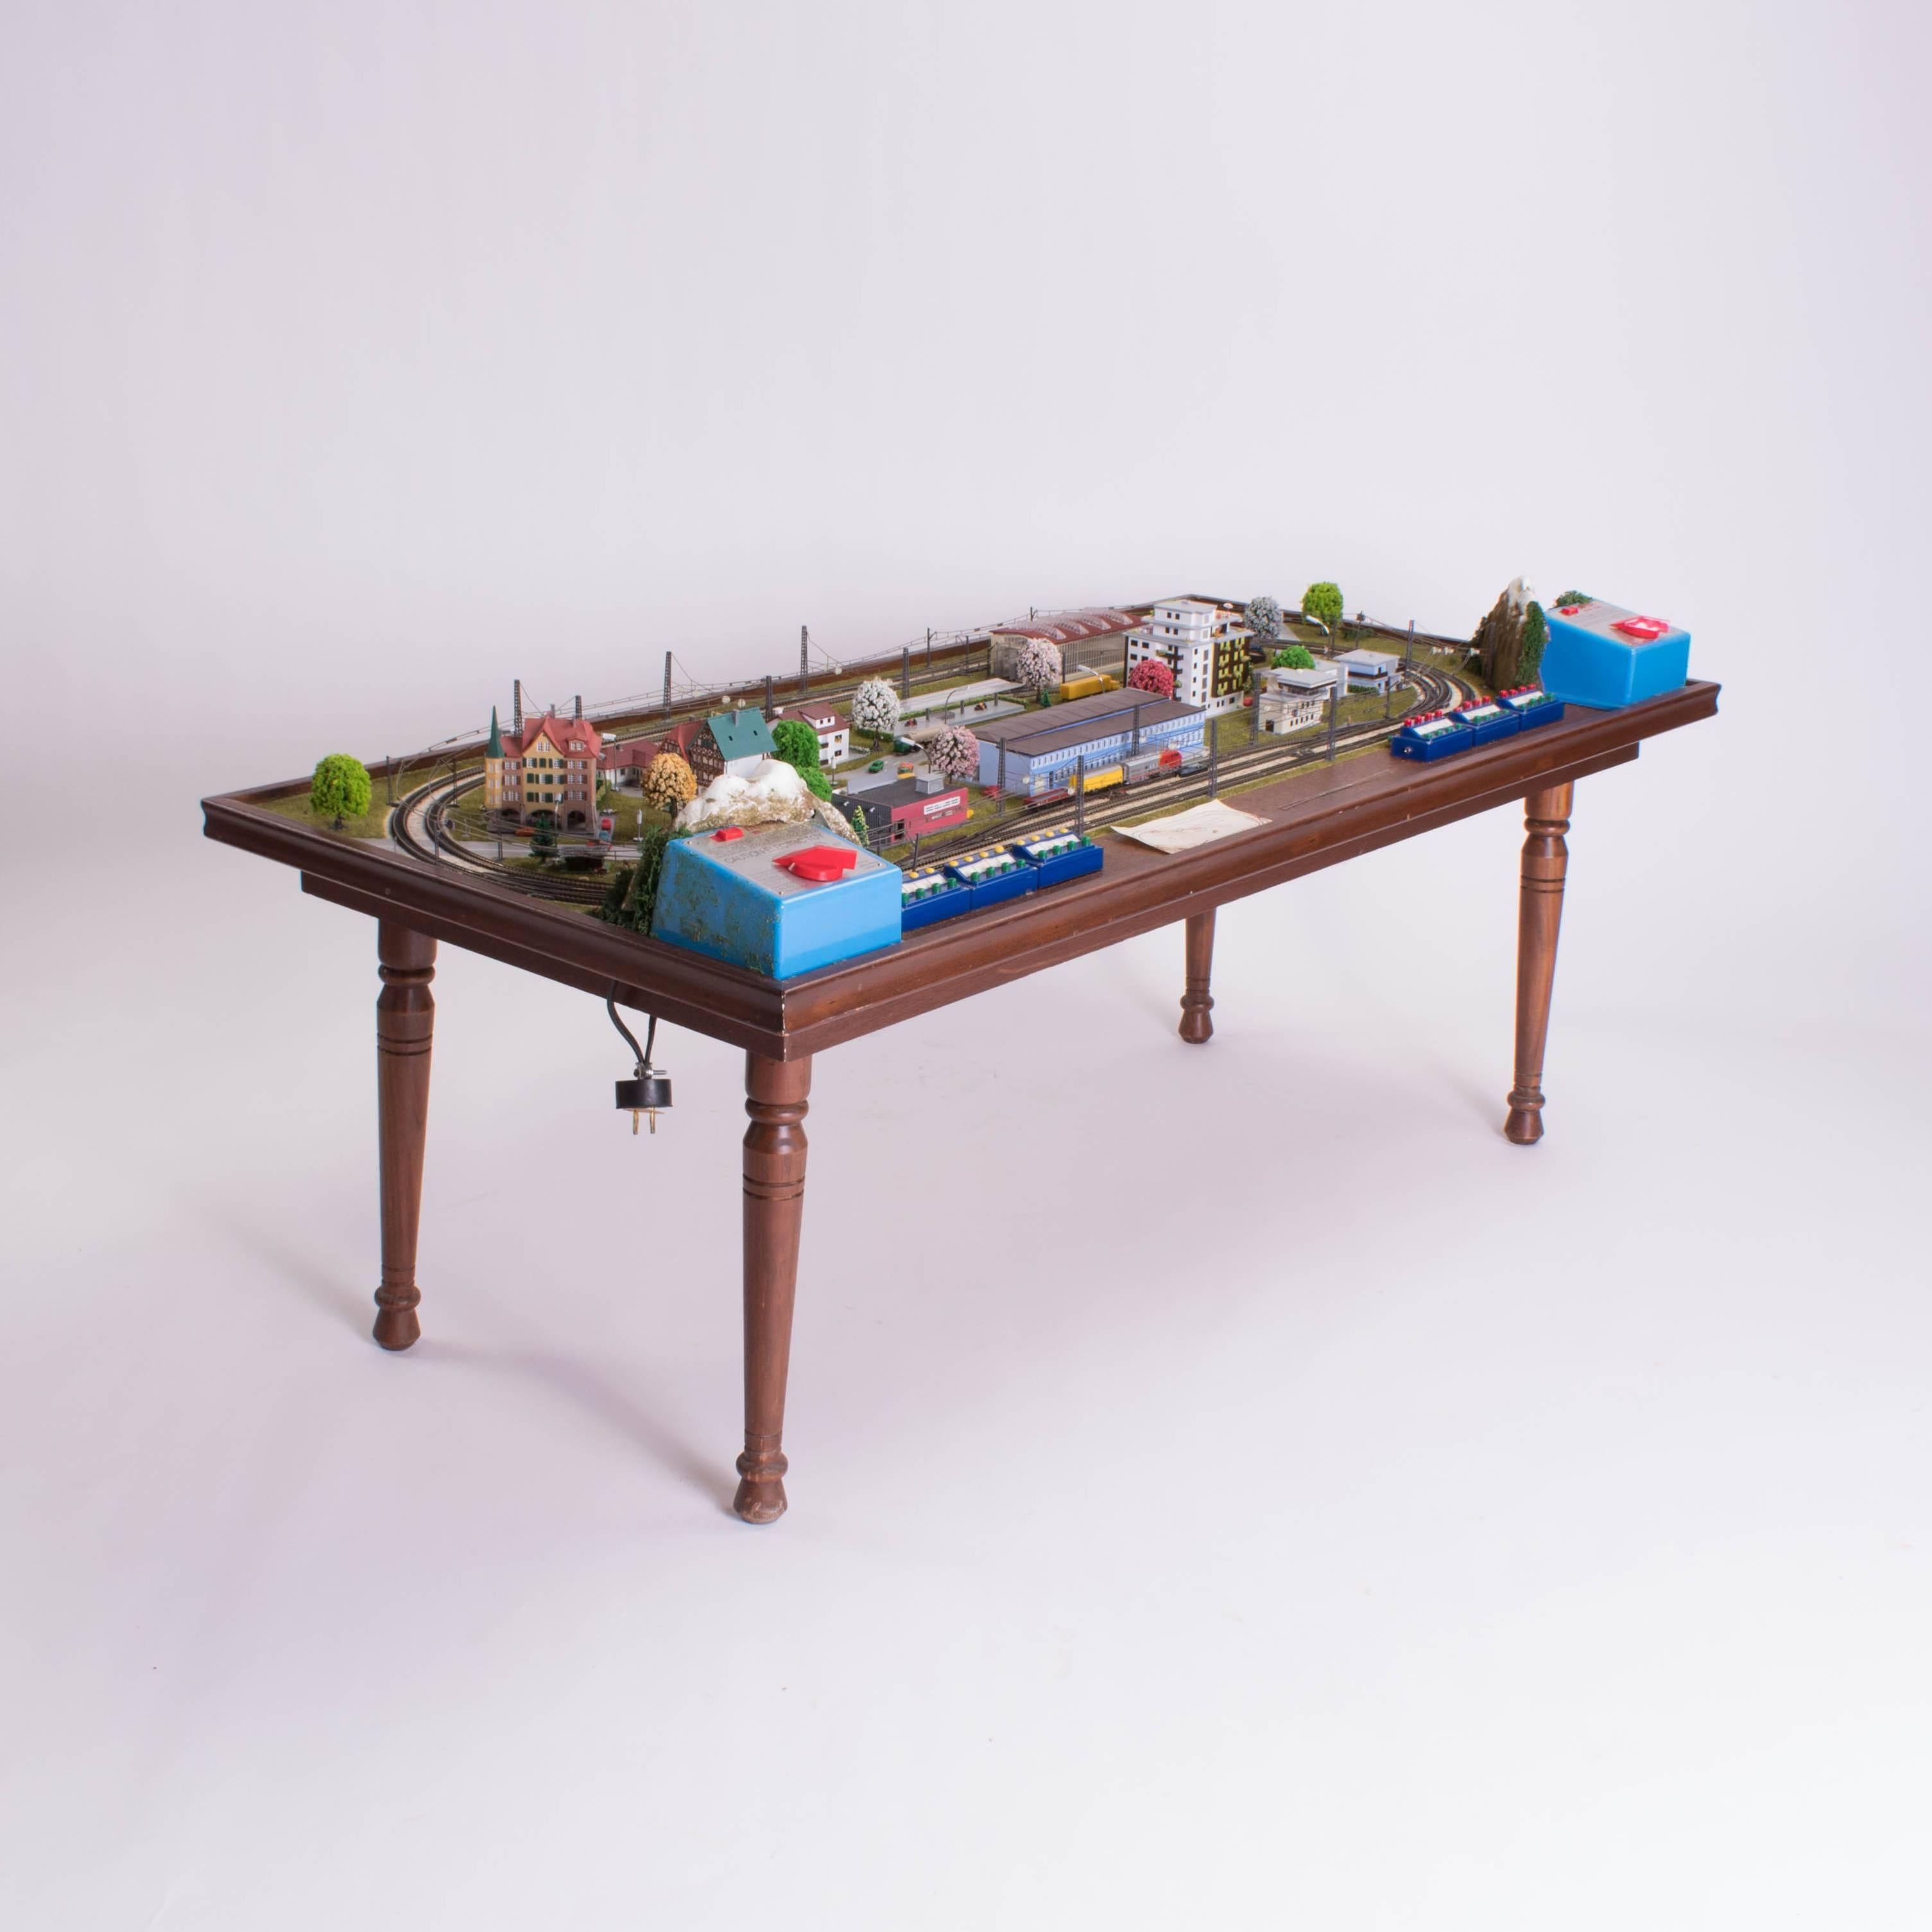 Full functional Merklin train set table under perspex cover to be used as side table or a possibly a coffee table.